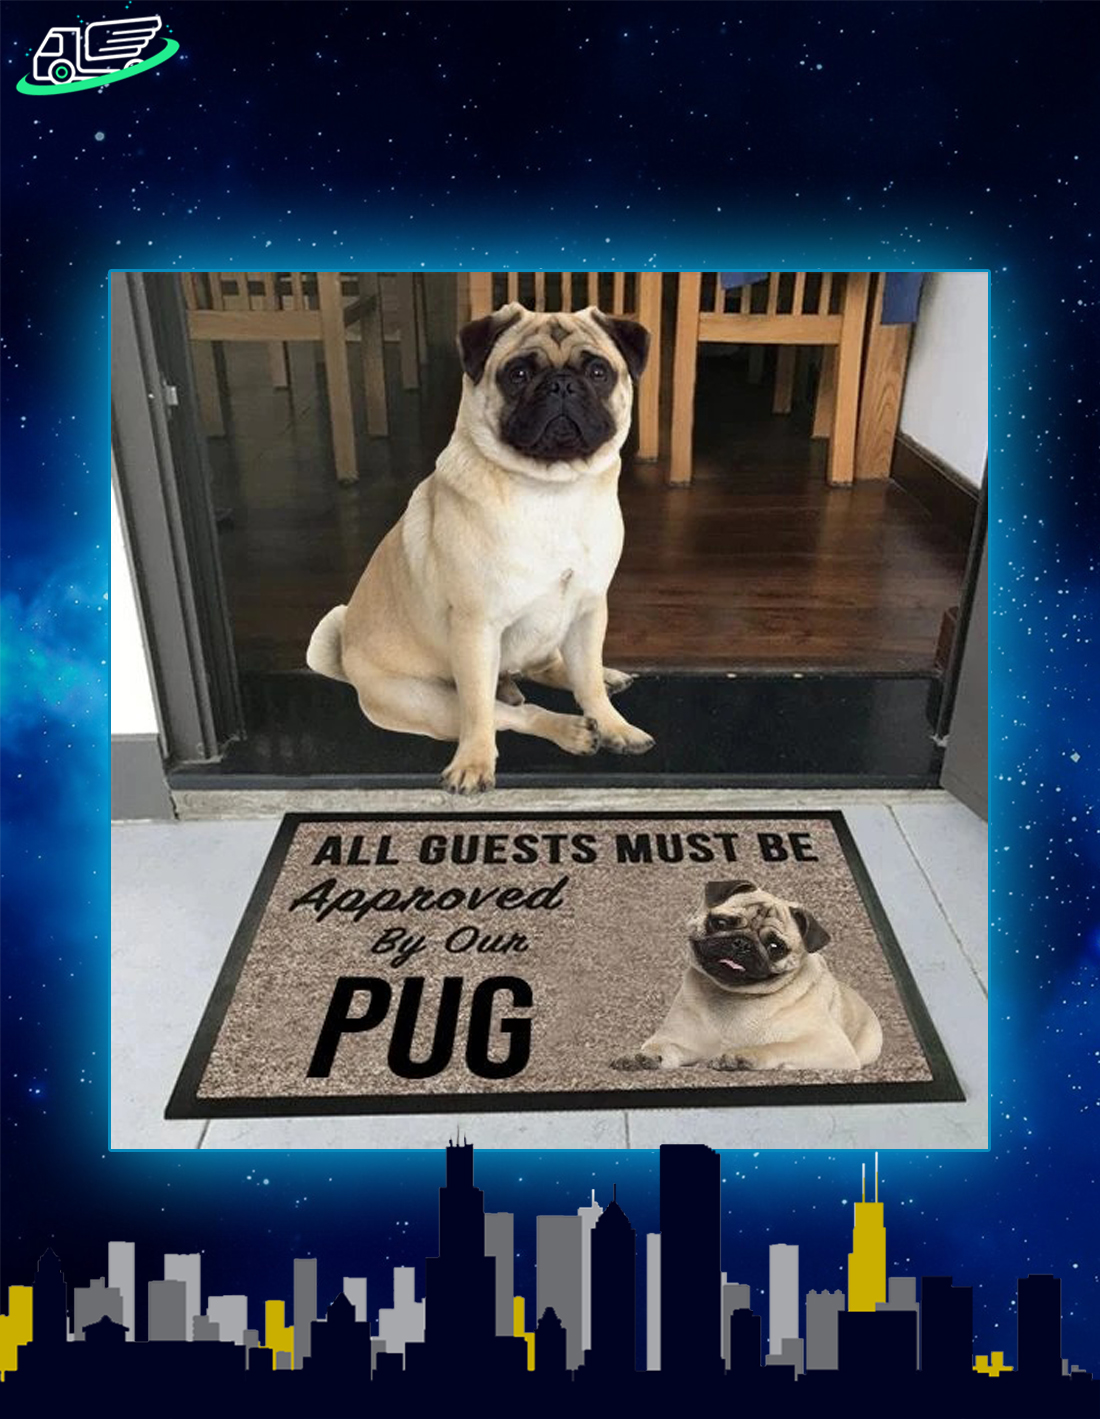 All guests must be approved by our pug doormat – Saleoff 041120